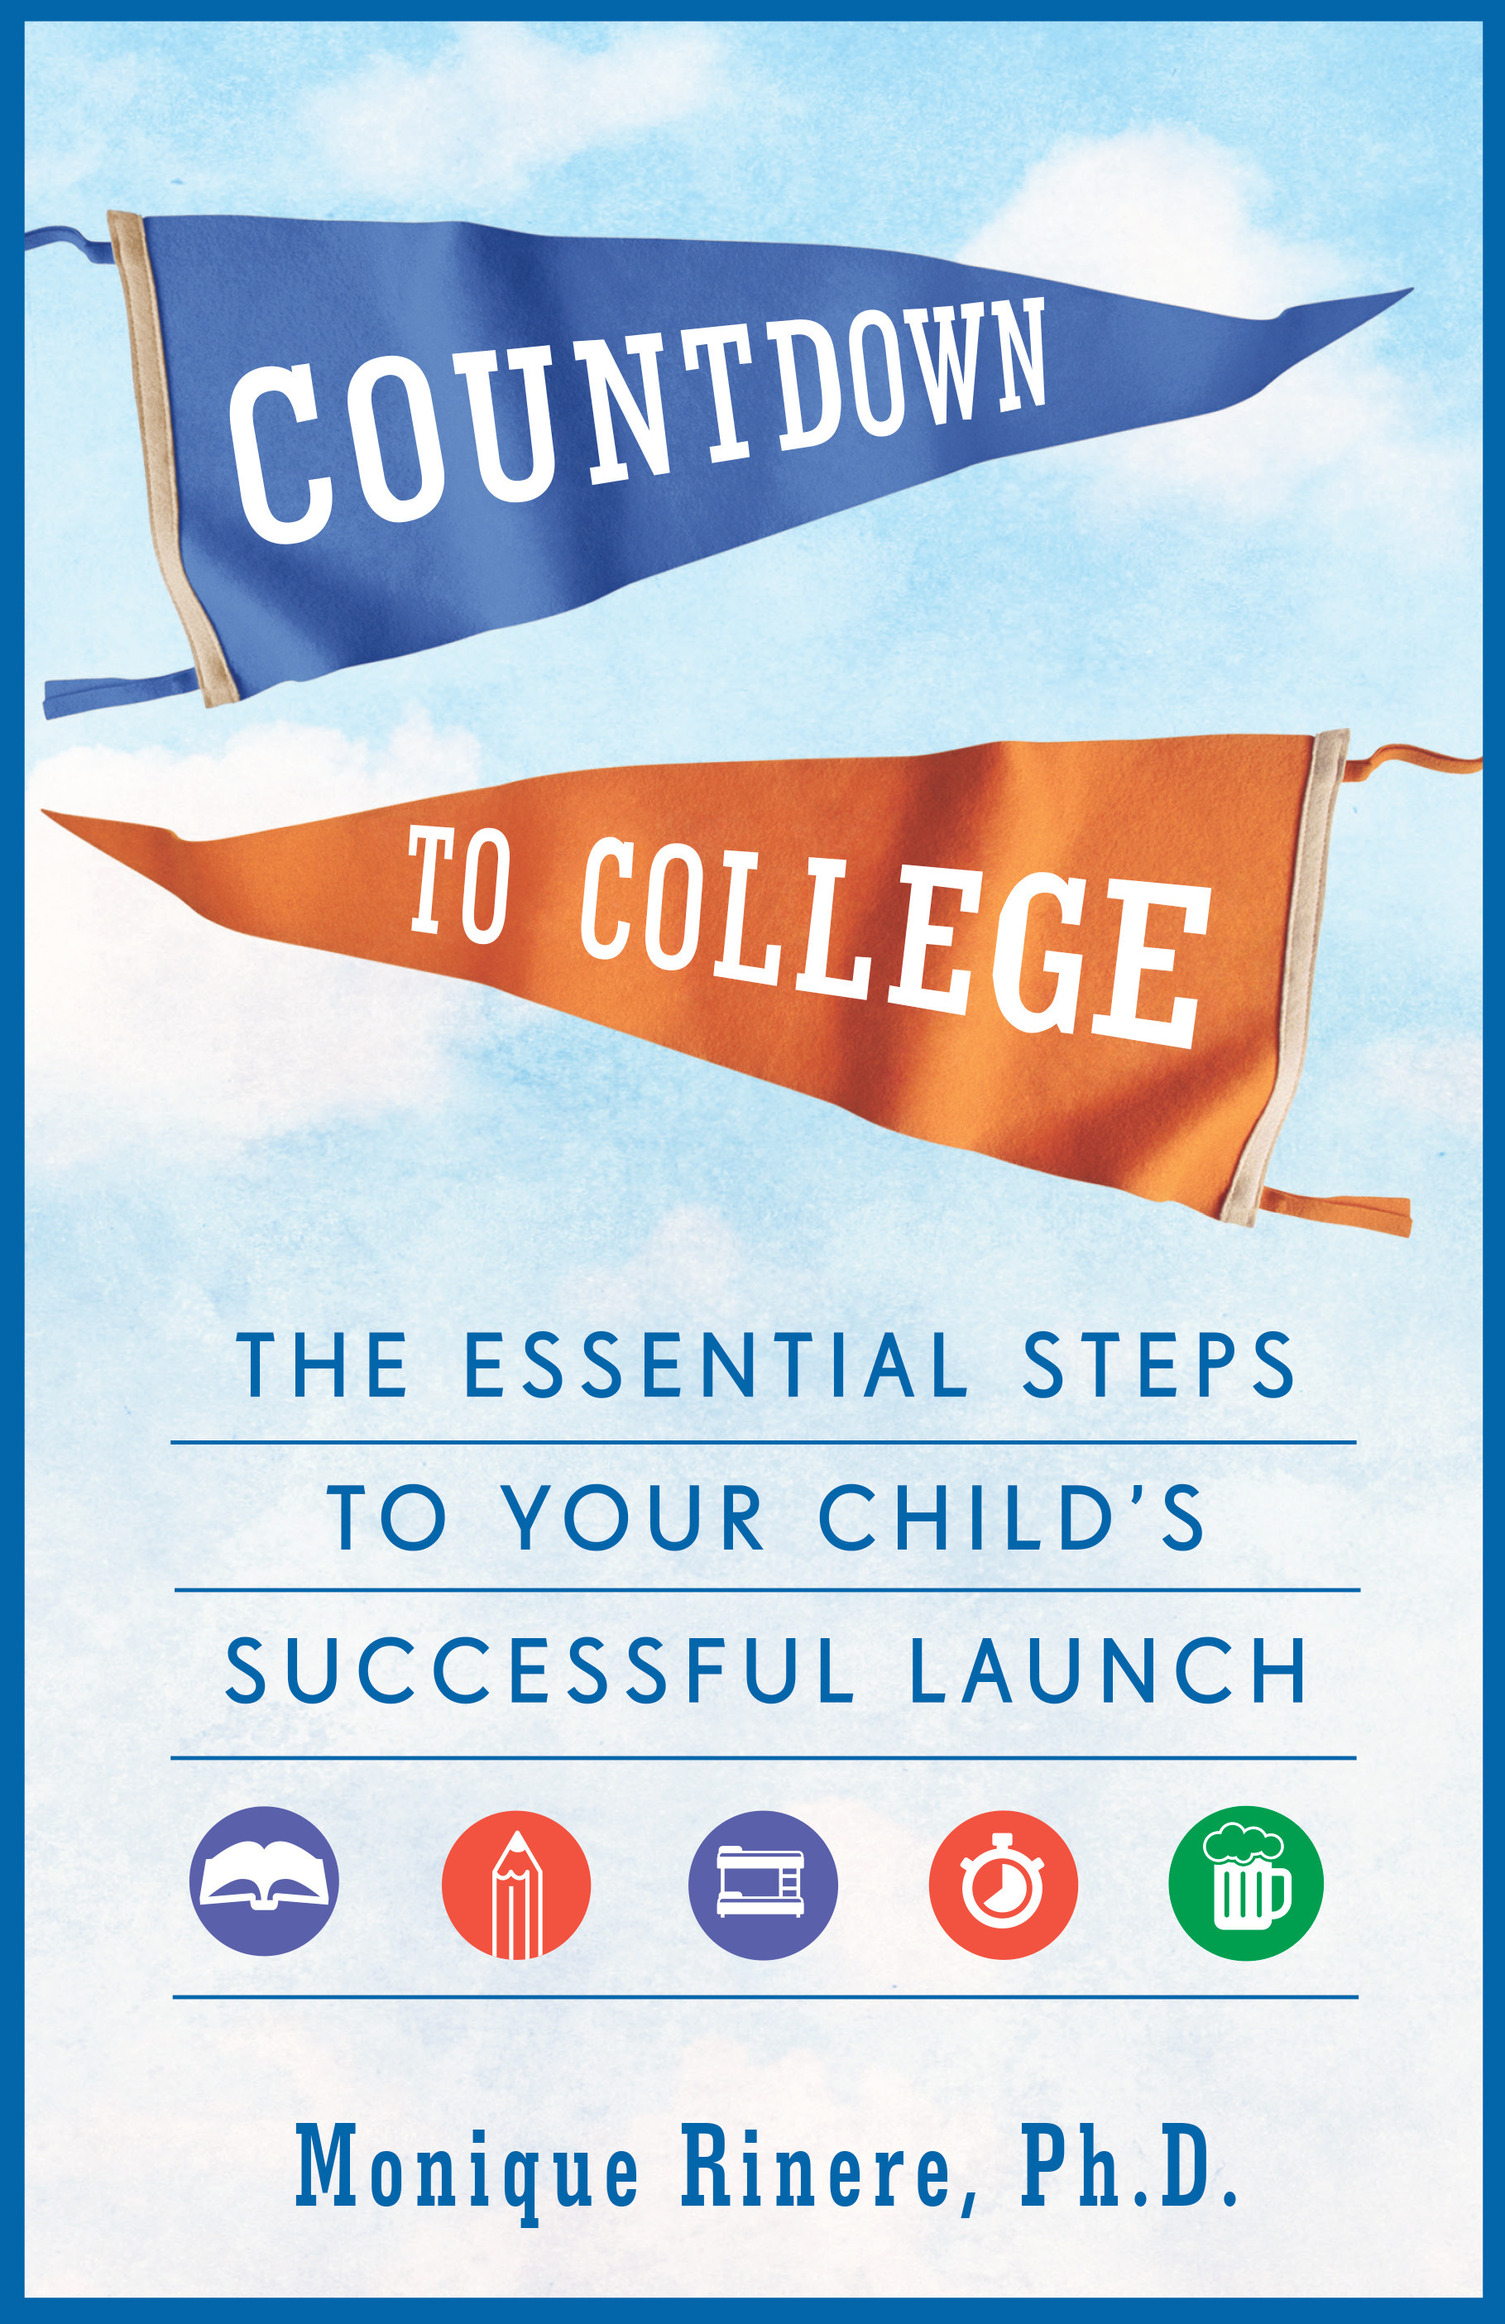 Praise for COUNTDOWN TO COLLEGE This book is a wonderful resource for parents - photo 1